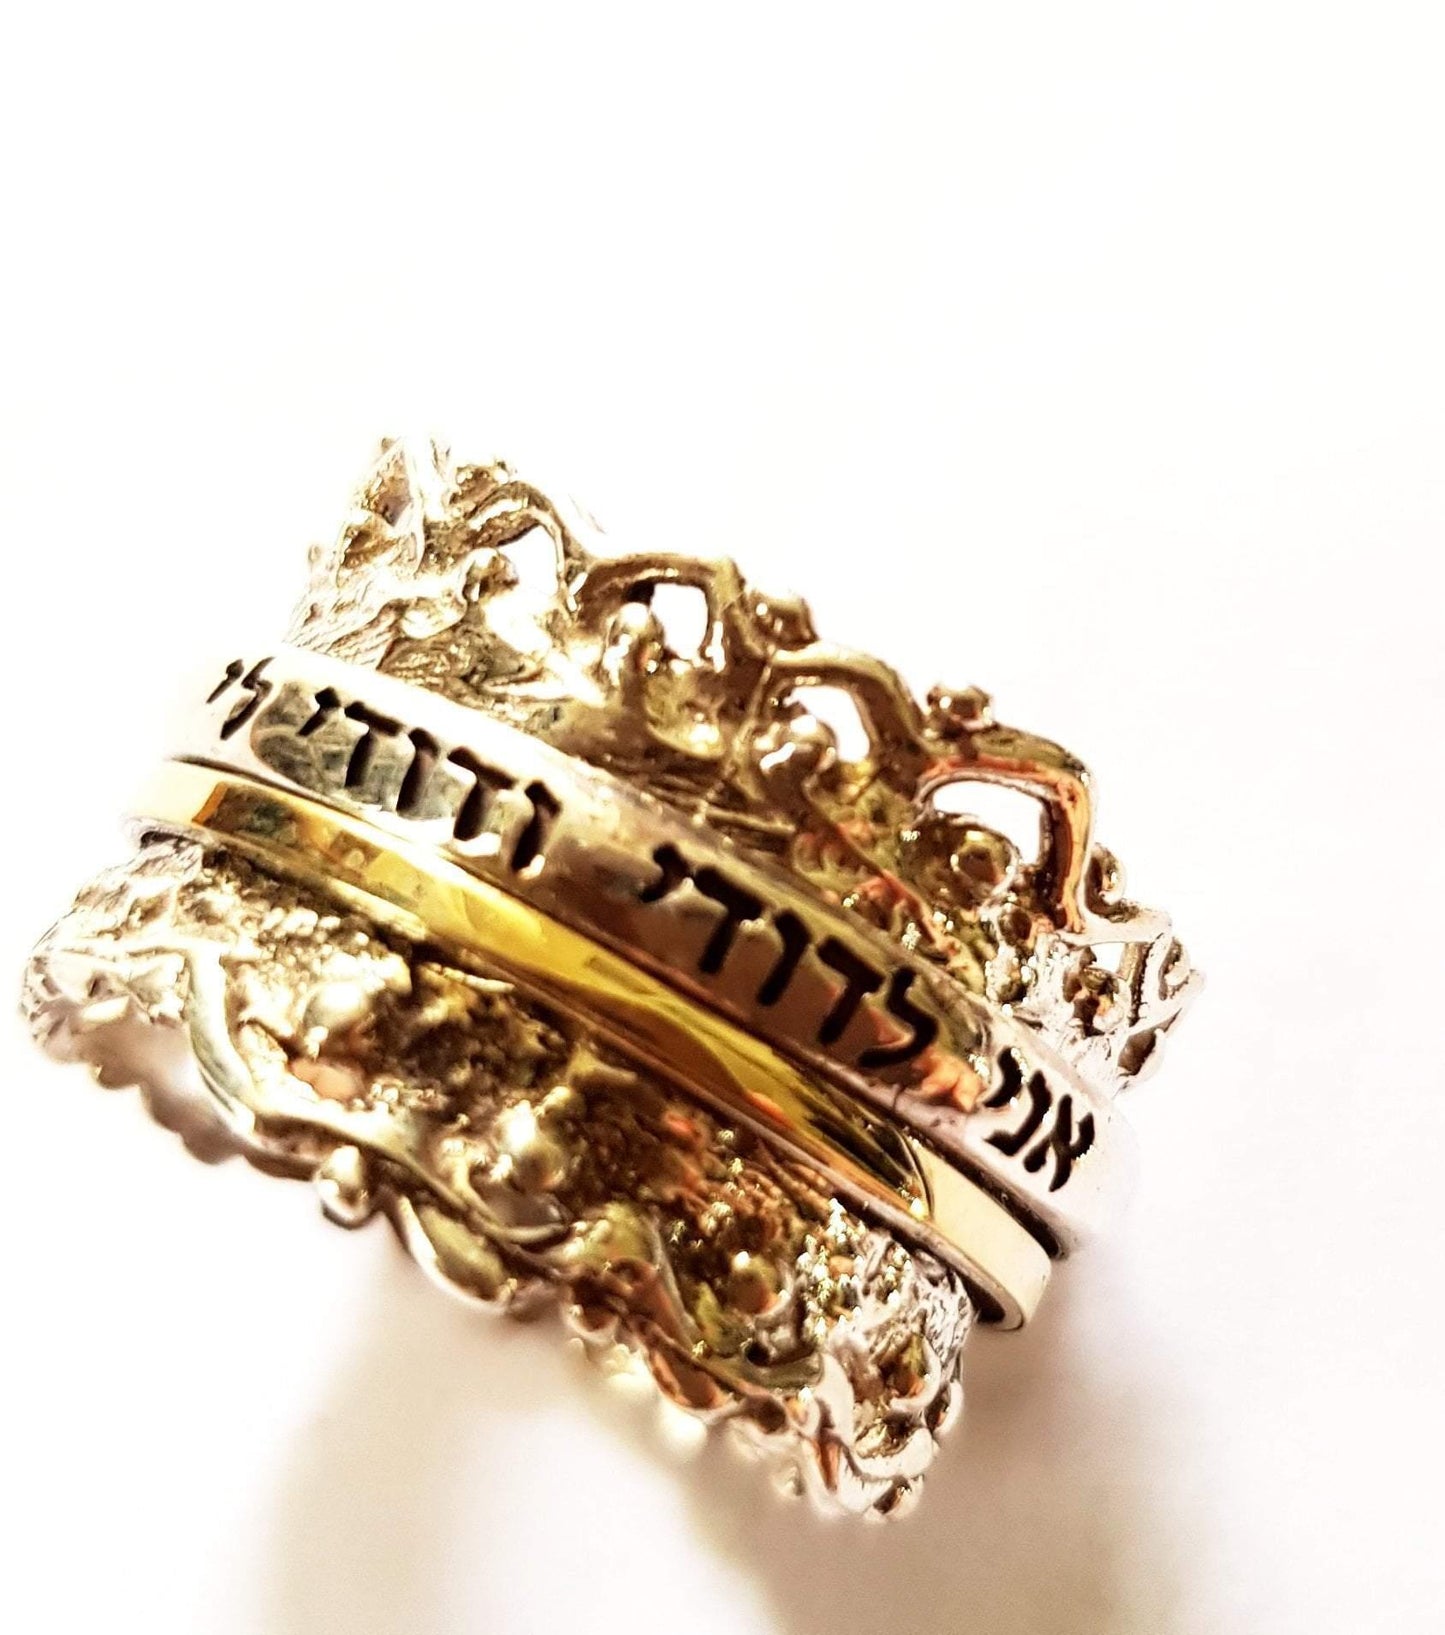 Bluenoemi Jewelry Personalized Rings Bluenoemi Israeli Jewelry | Personalized Jewelry Gifts Spinner Ring · Inspiration Ring · jewelry in israel· Floral Ring · Custom Handwriting Ring · Ring Valentines · Hebrew Engraved Rose and Gold Ring · Beloved Ring